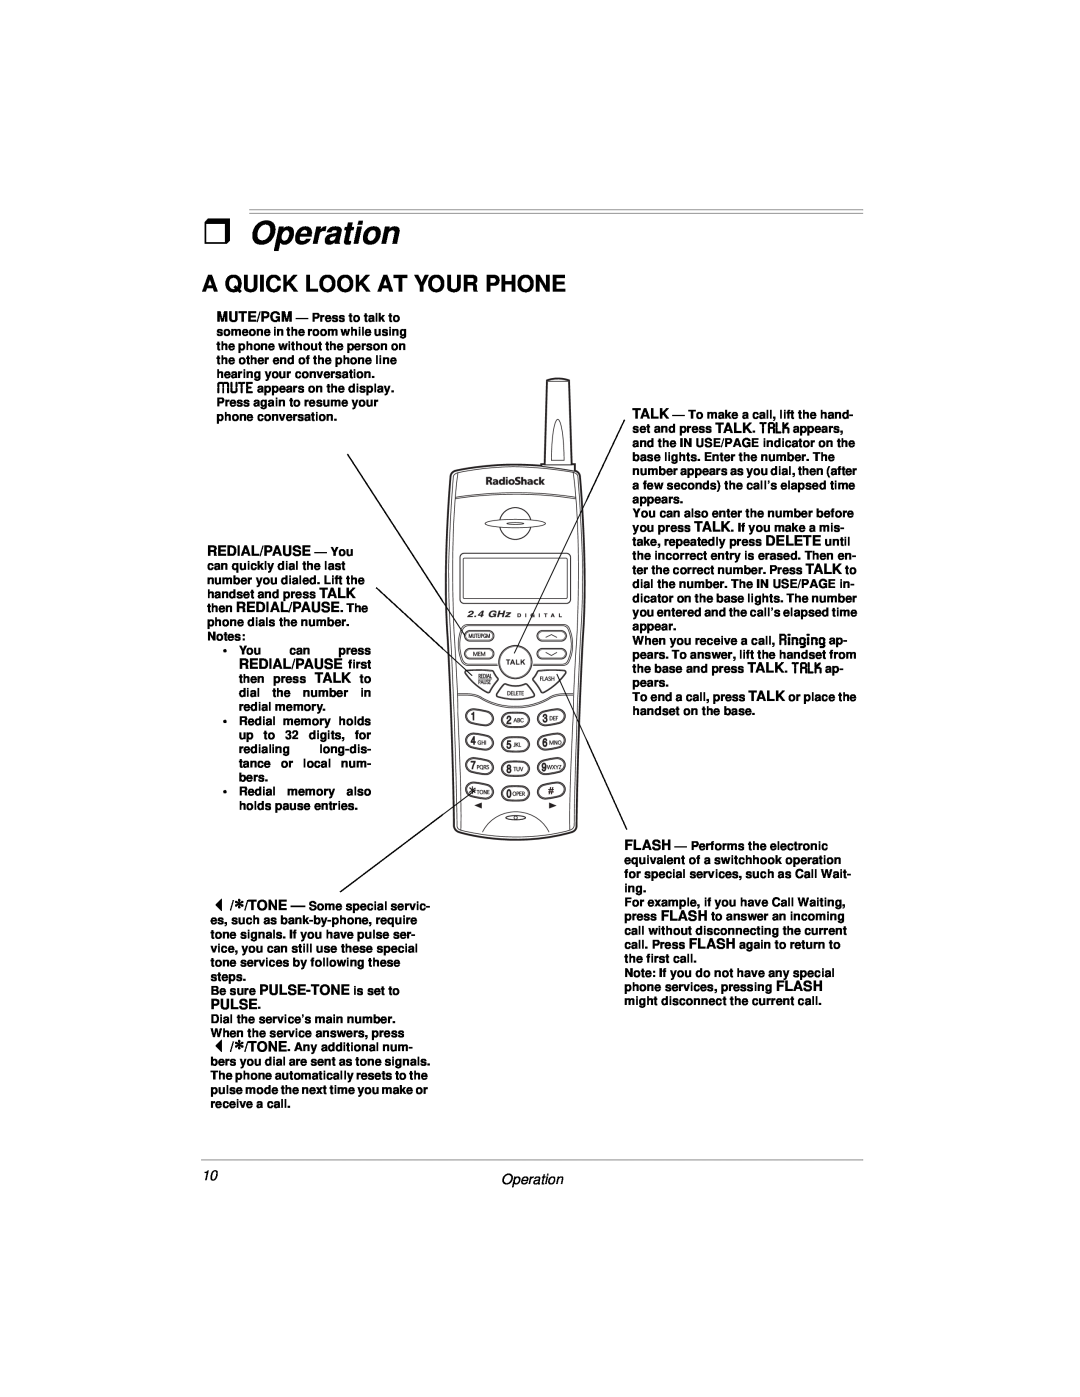 Radio Shack 2.4 GHz Digital Spread Spectrum Cordless Telephone with Call Waiting/Caller ID owner manual ˆ Operation, Pulse 